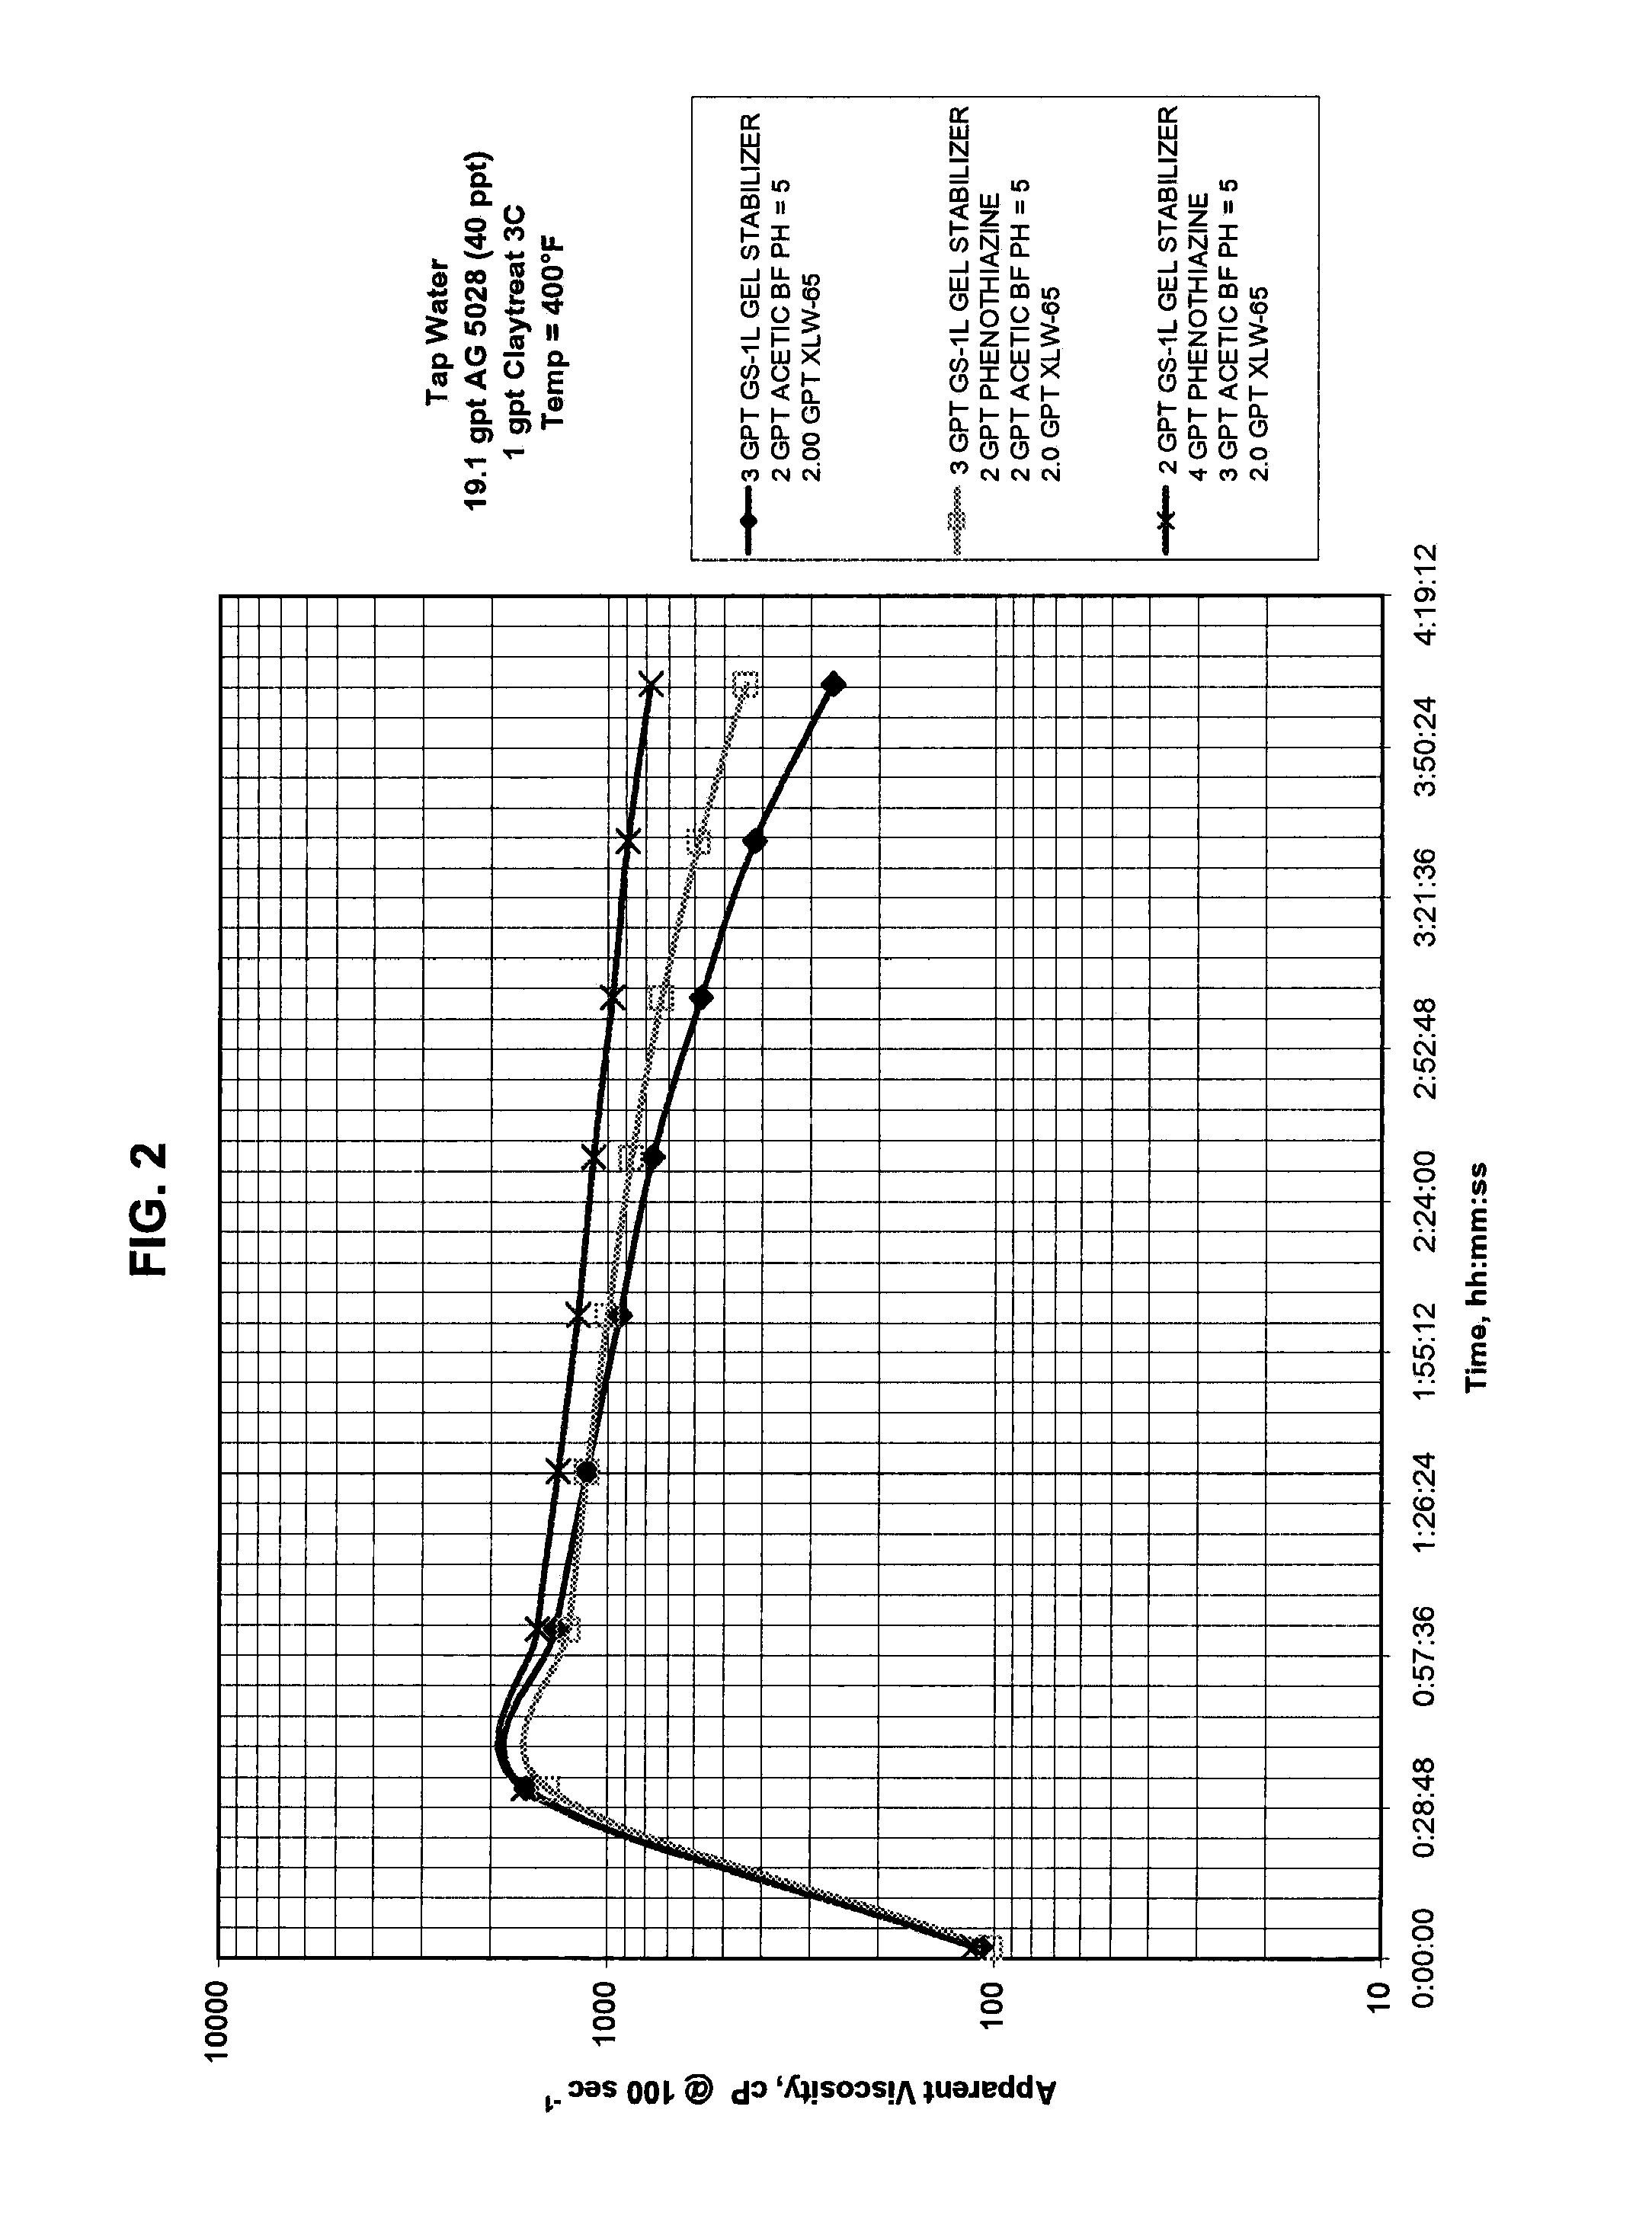 High temperature stabilizer for well treatment fluids and methods of using same